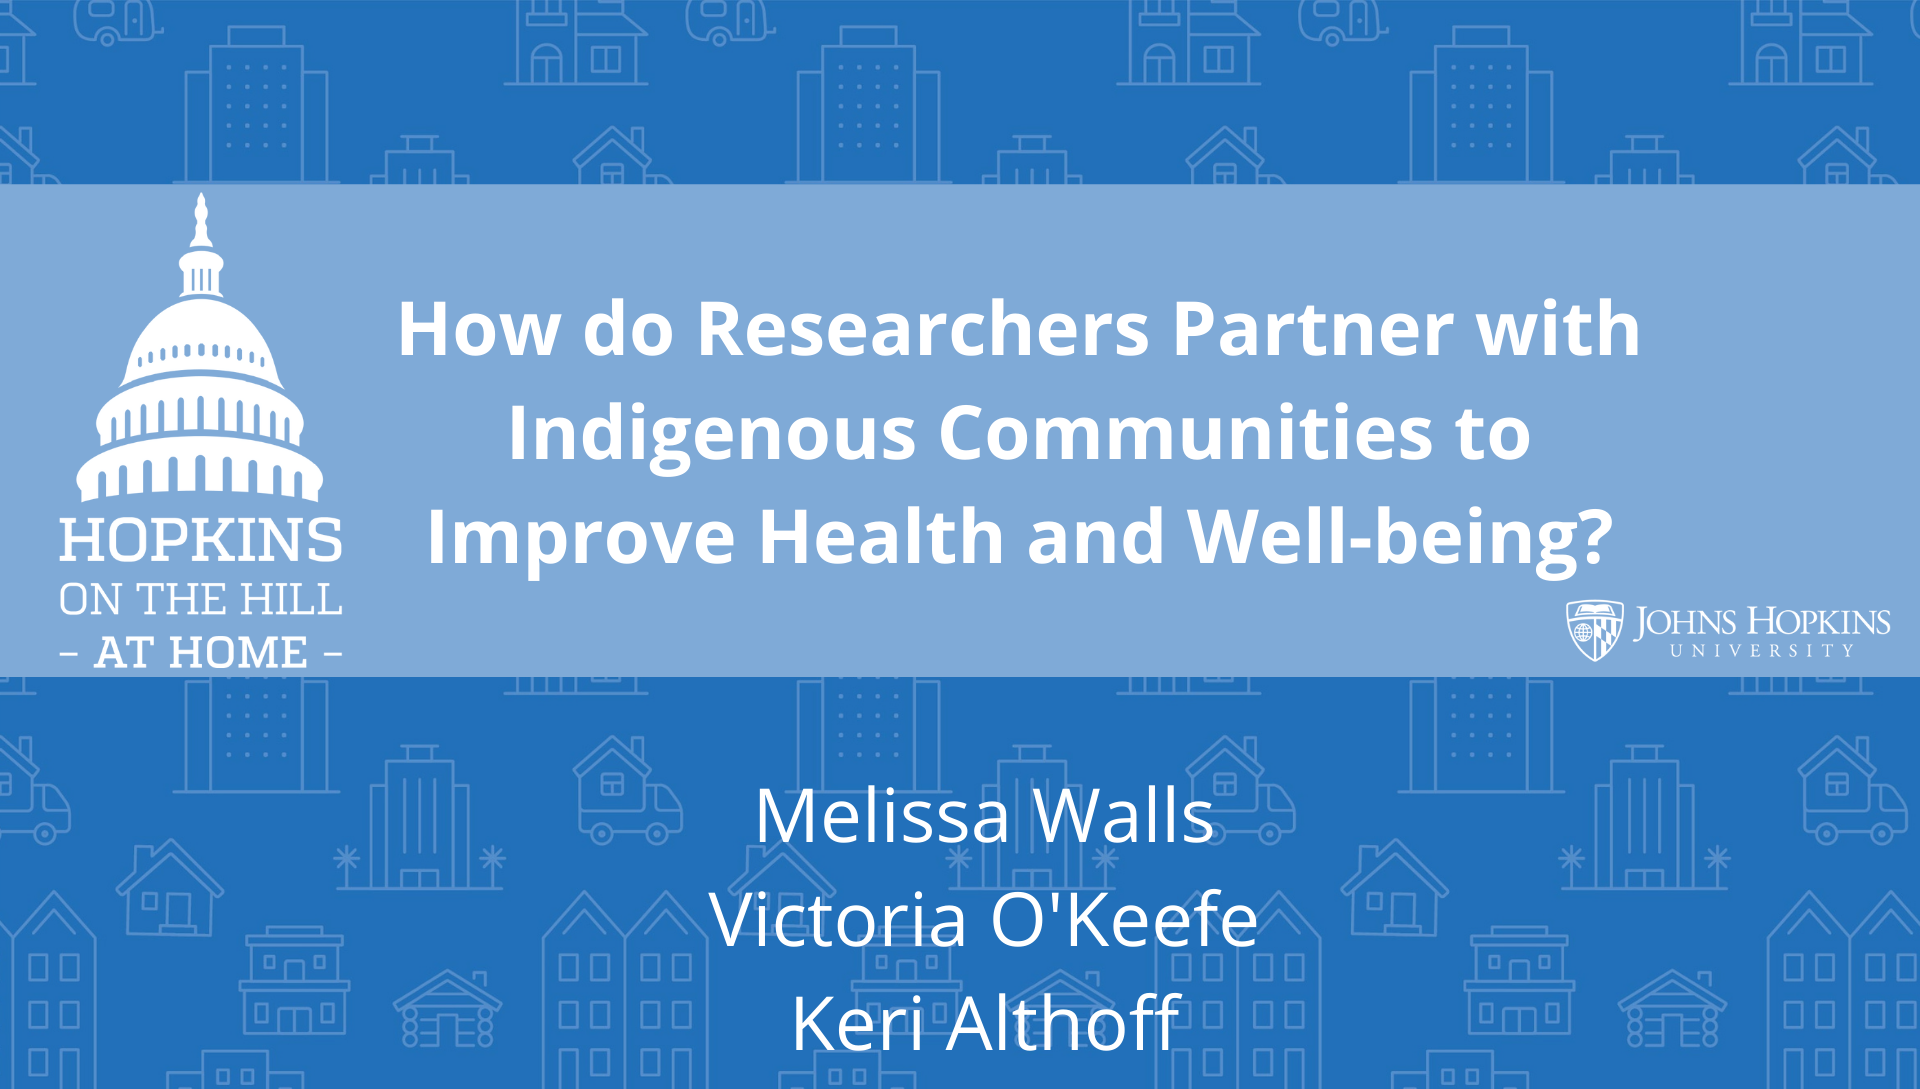 Solid blue background featuring line drawings of various types of homes with text reading “How do researchers partners with indigenous communities to improve health and well-being?” and names listed below: Melissa Walls, Victoria O’Keefe, Keri Althoff. On the left the Hopkins on the Hill at Home logo featuring the Capitol Dome. On the right, the Johns Hopkins University logo. 